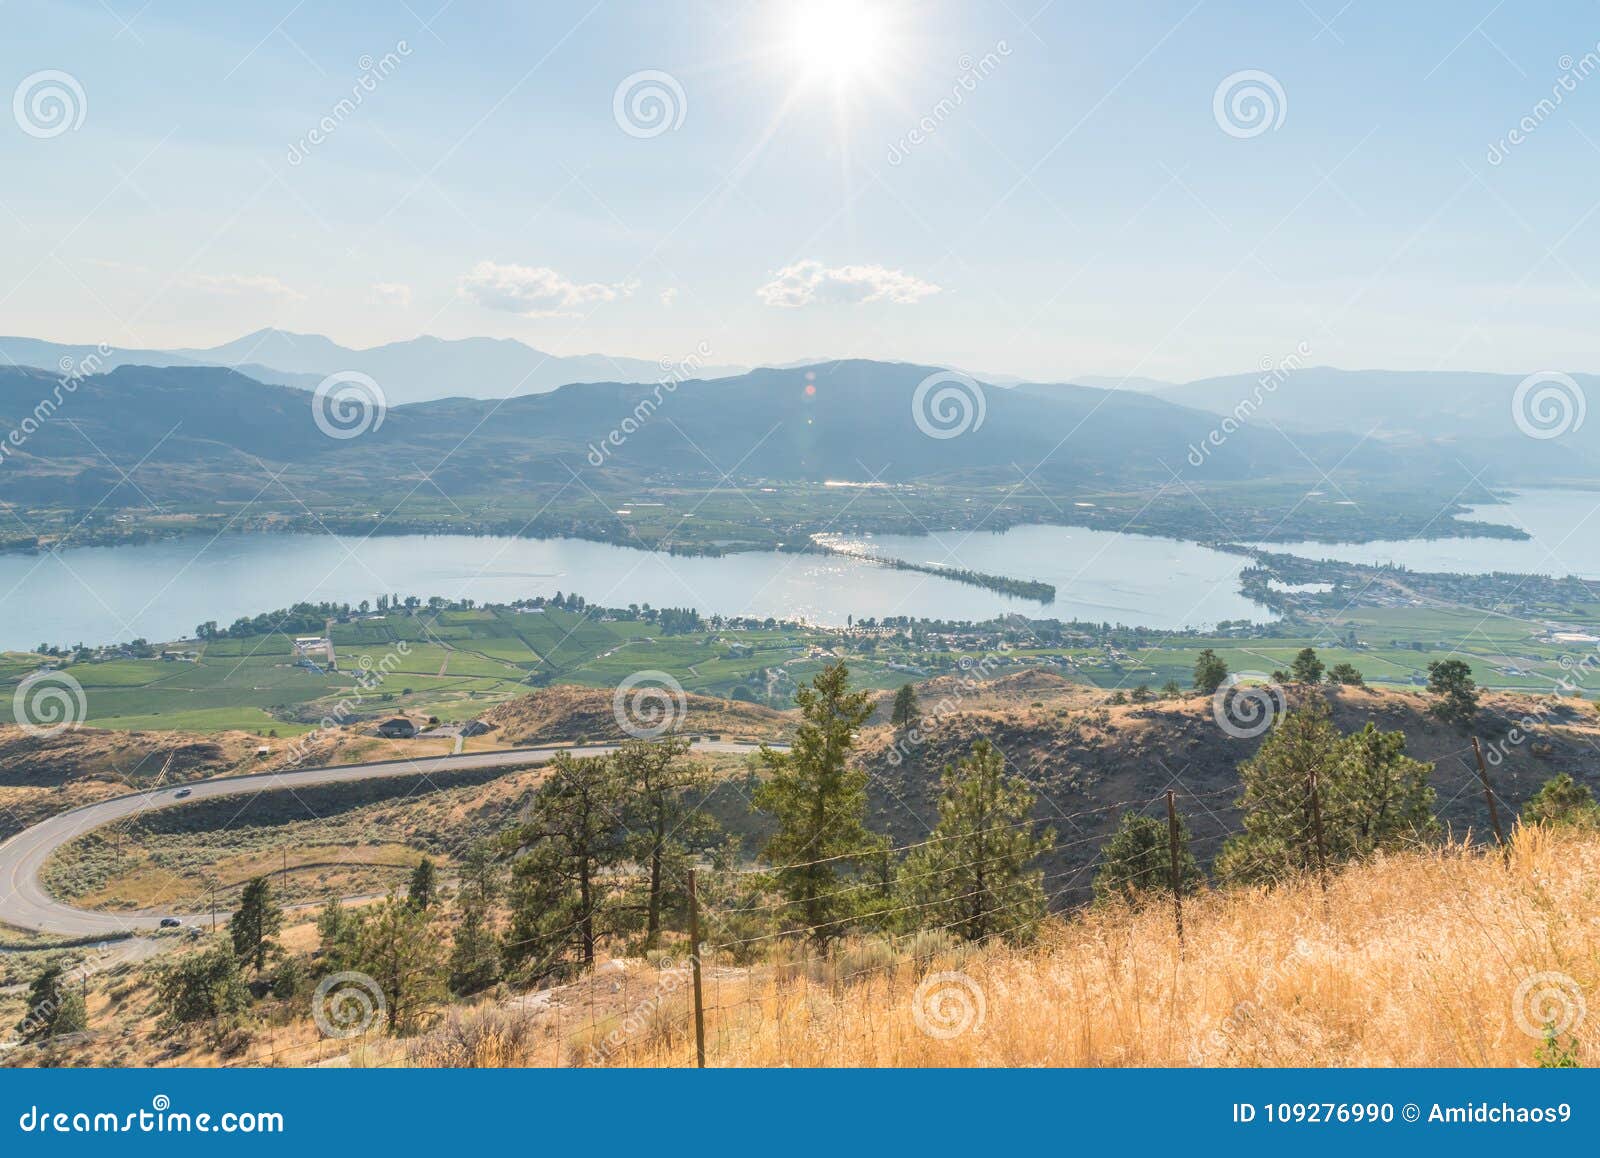 view of osoyoos from anarchist mountain